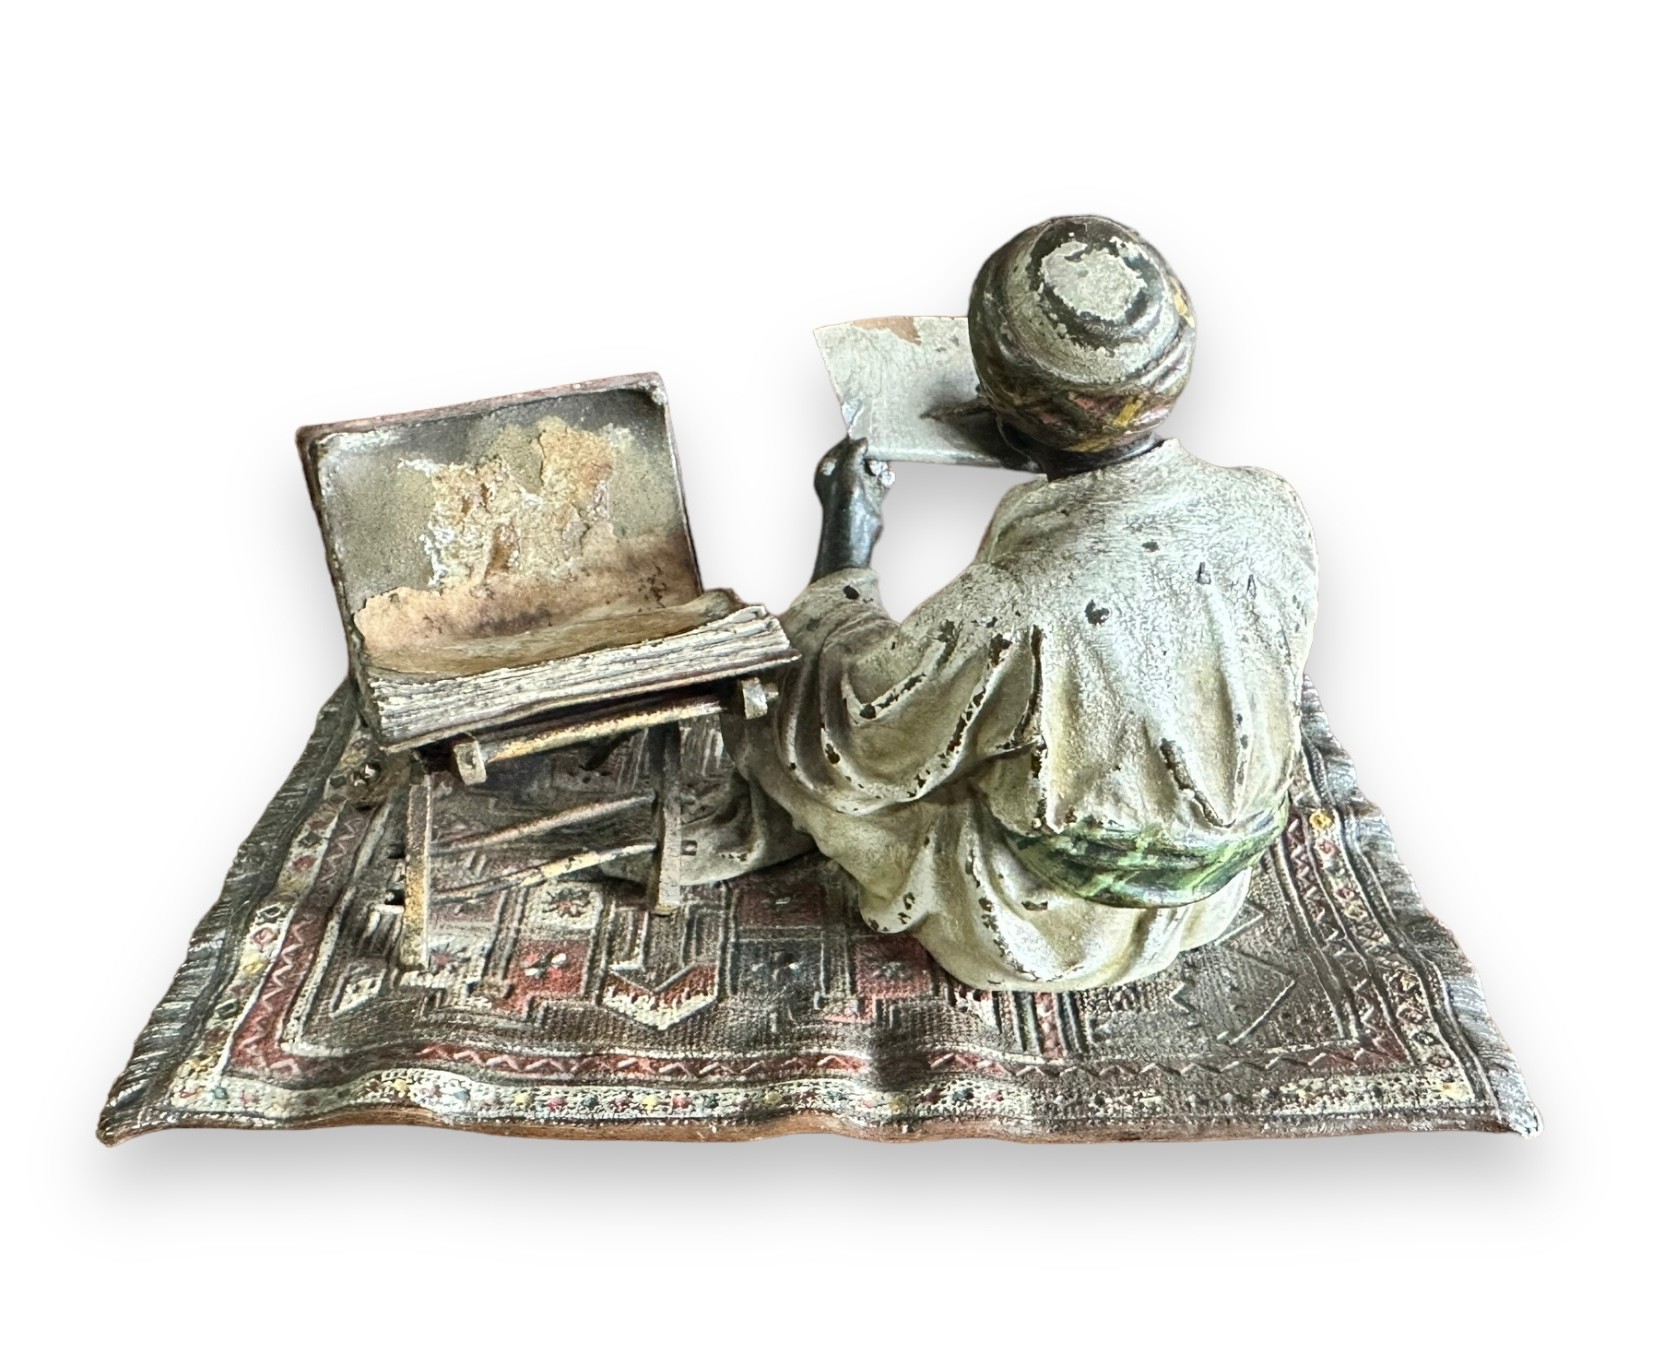 Franz Bergman (Austrian, 1861-1936), late 19th century, cast as an Arab scribe seated on a carpet, - Image 2 of 5